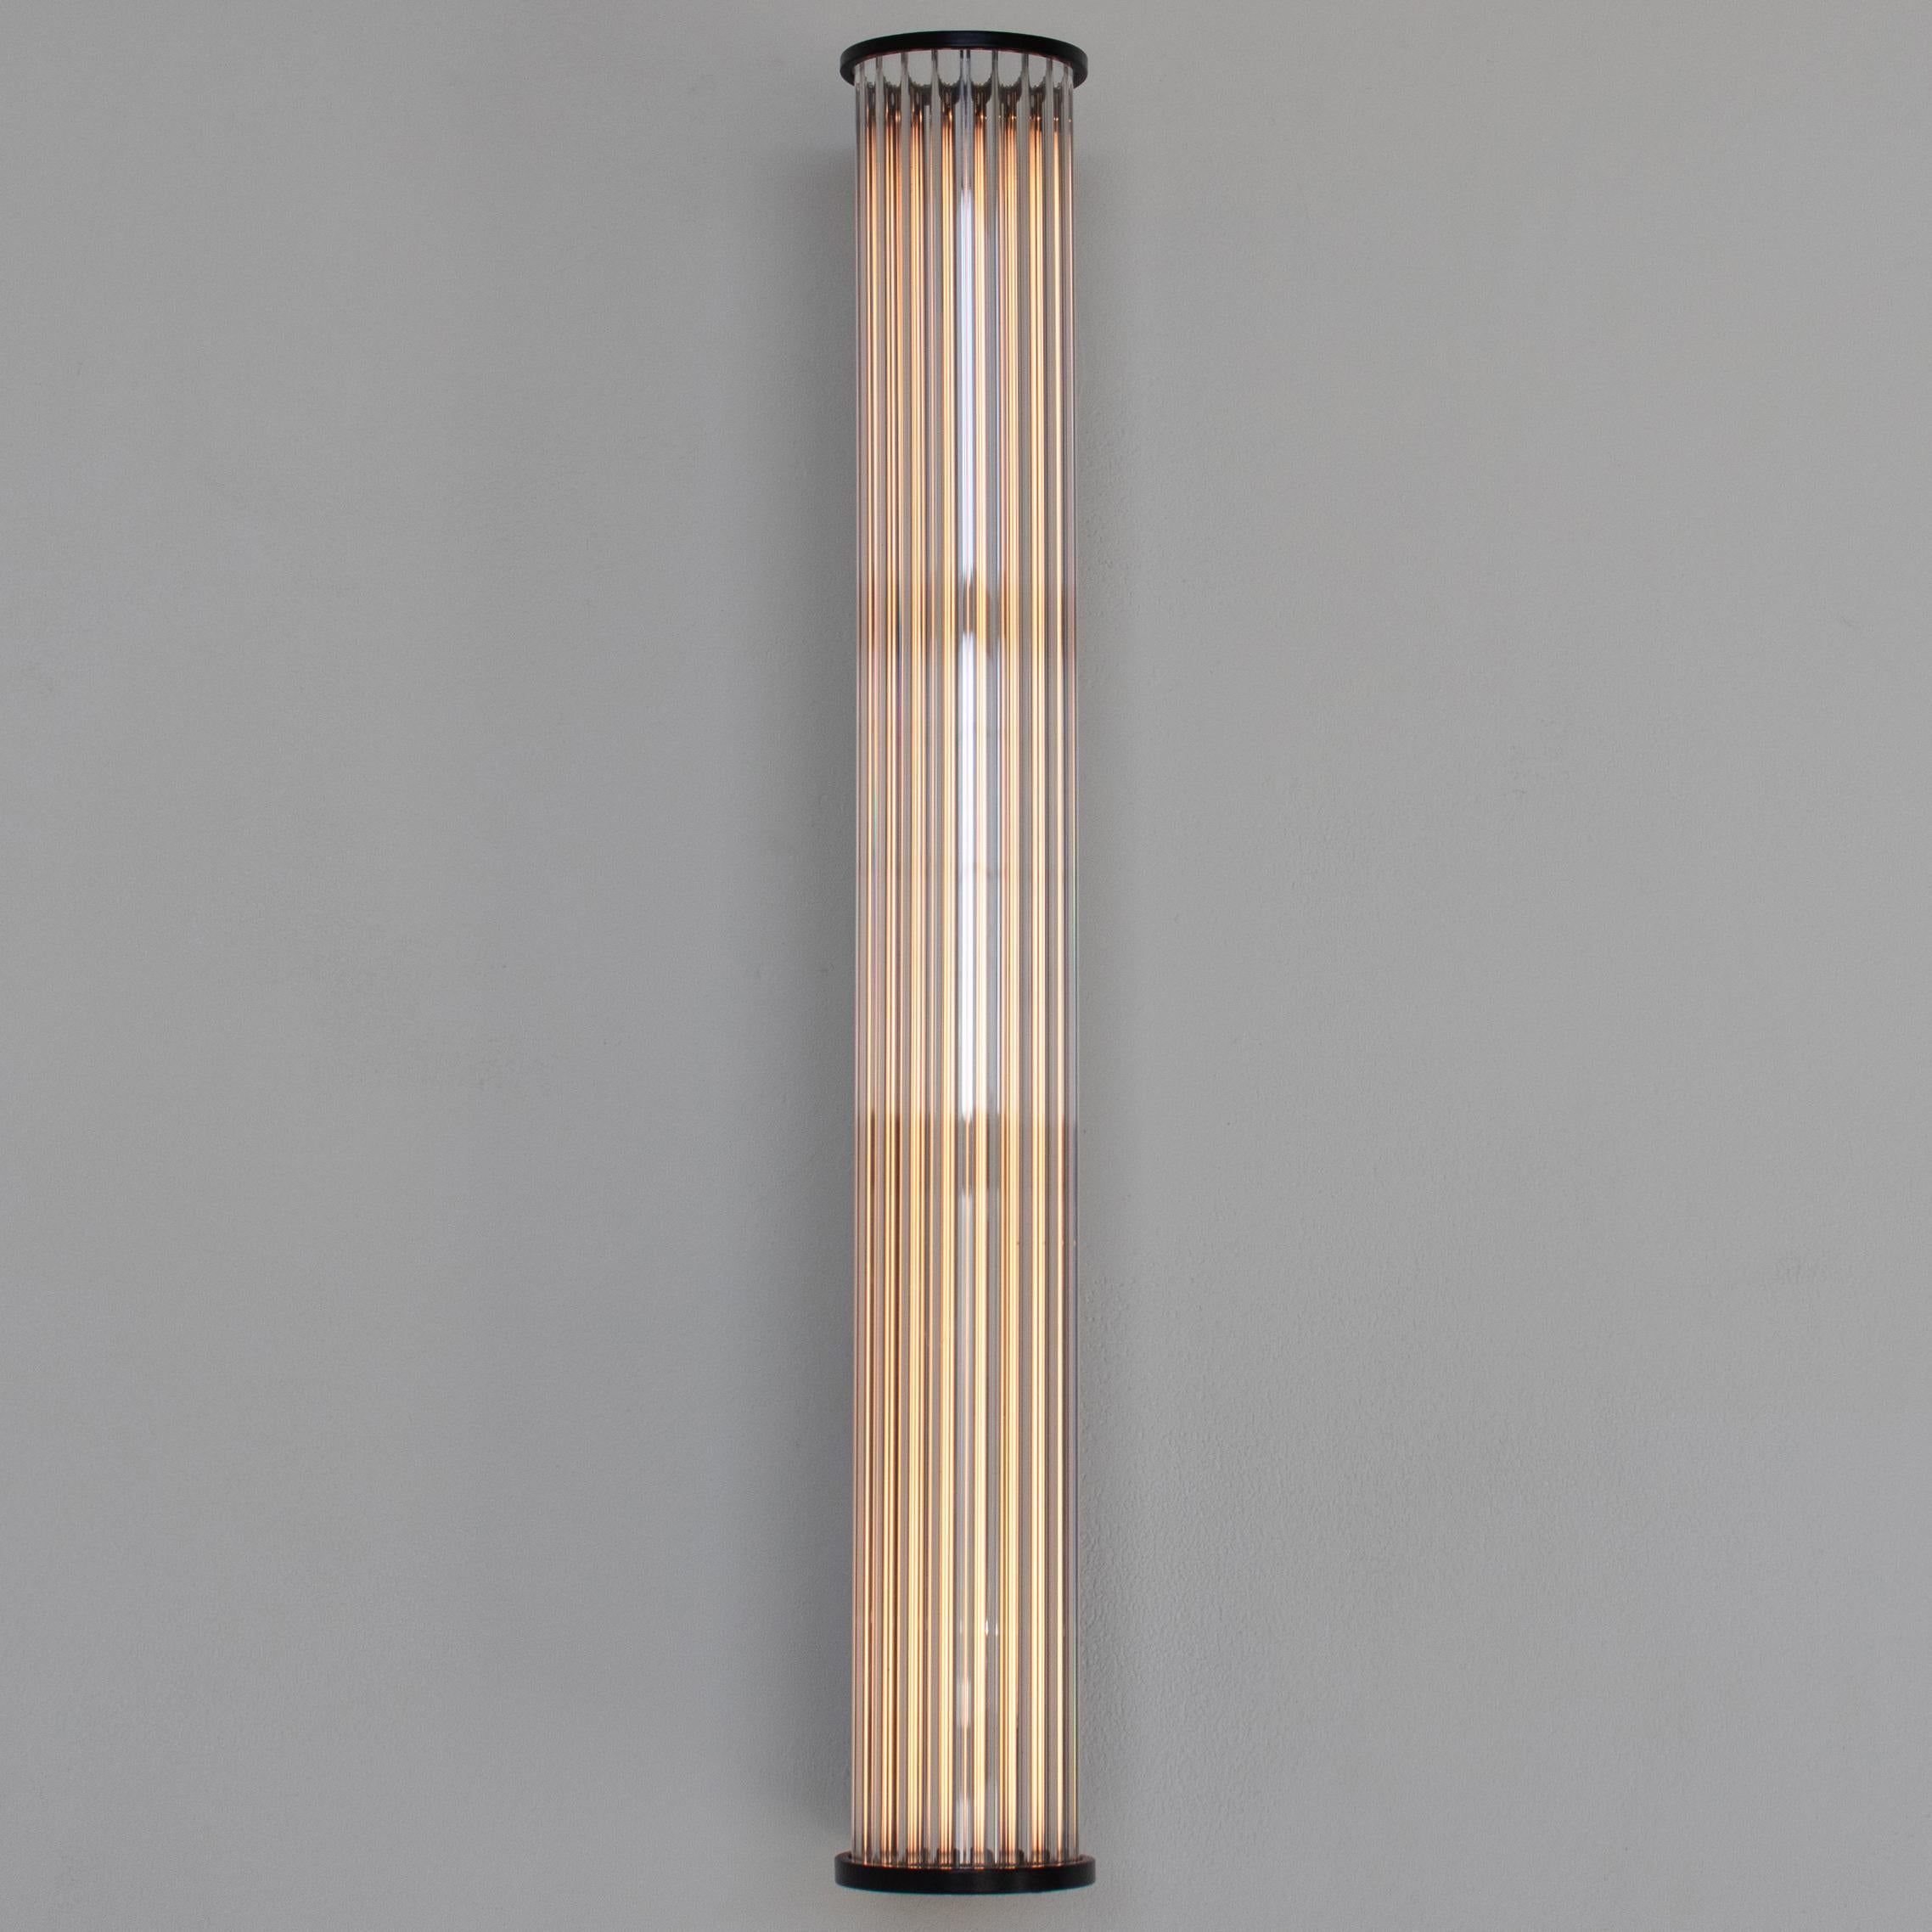 The EMBER S1 Wall Sconce boasts a unique design with a radiant scalloped glass tube diffuser and 2 delicate rings that securely hold the diffuser in place, creating a warm and inviting glow.

Available in a variety of finishes and sizes.
Inquire